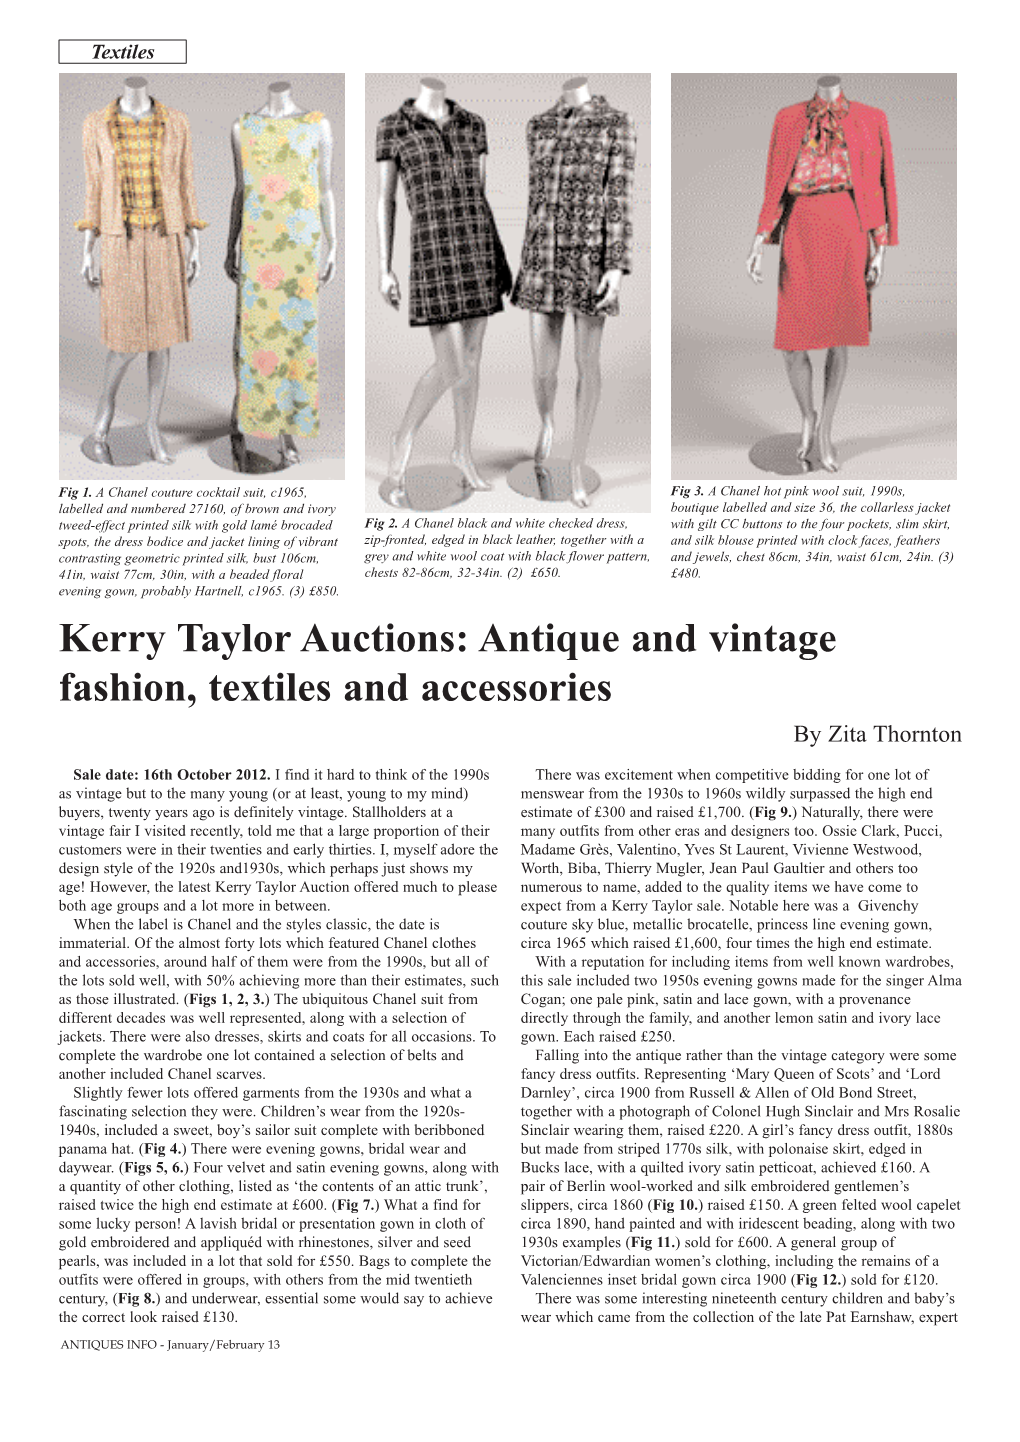 Kerry Taylor Auctions: Antique and Vintage Fashion, Textiles and Accessories by Zita Thornton